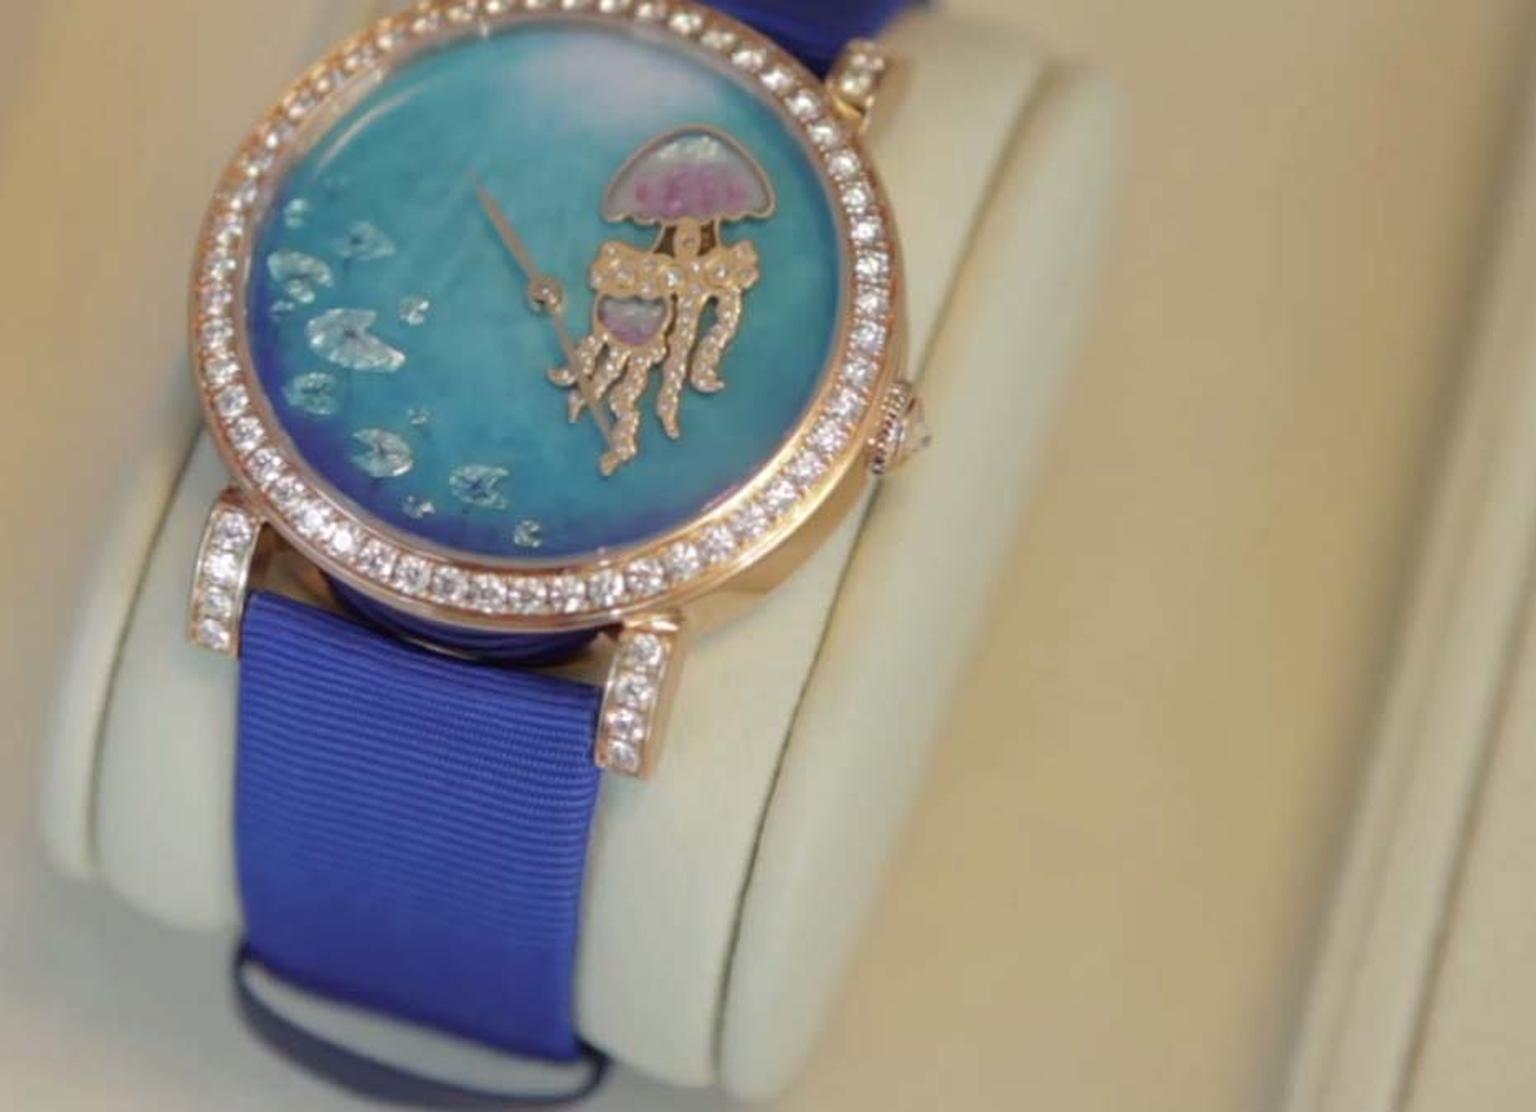 DeLaneau Jellyfish watch, launched at Baselworld 2014